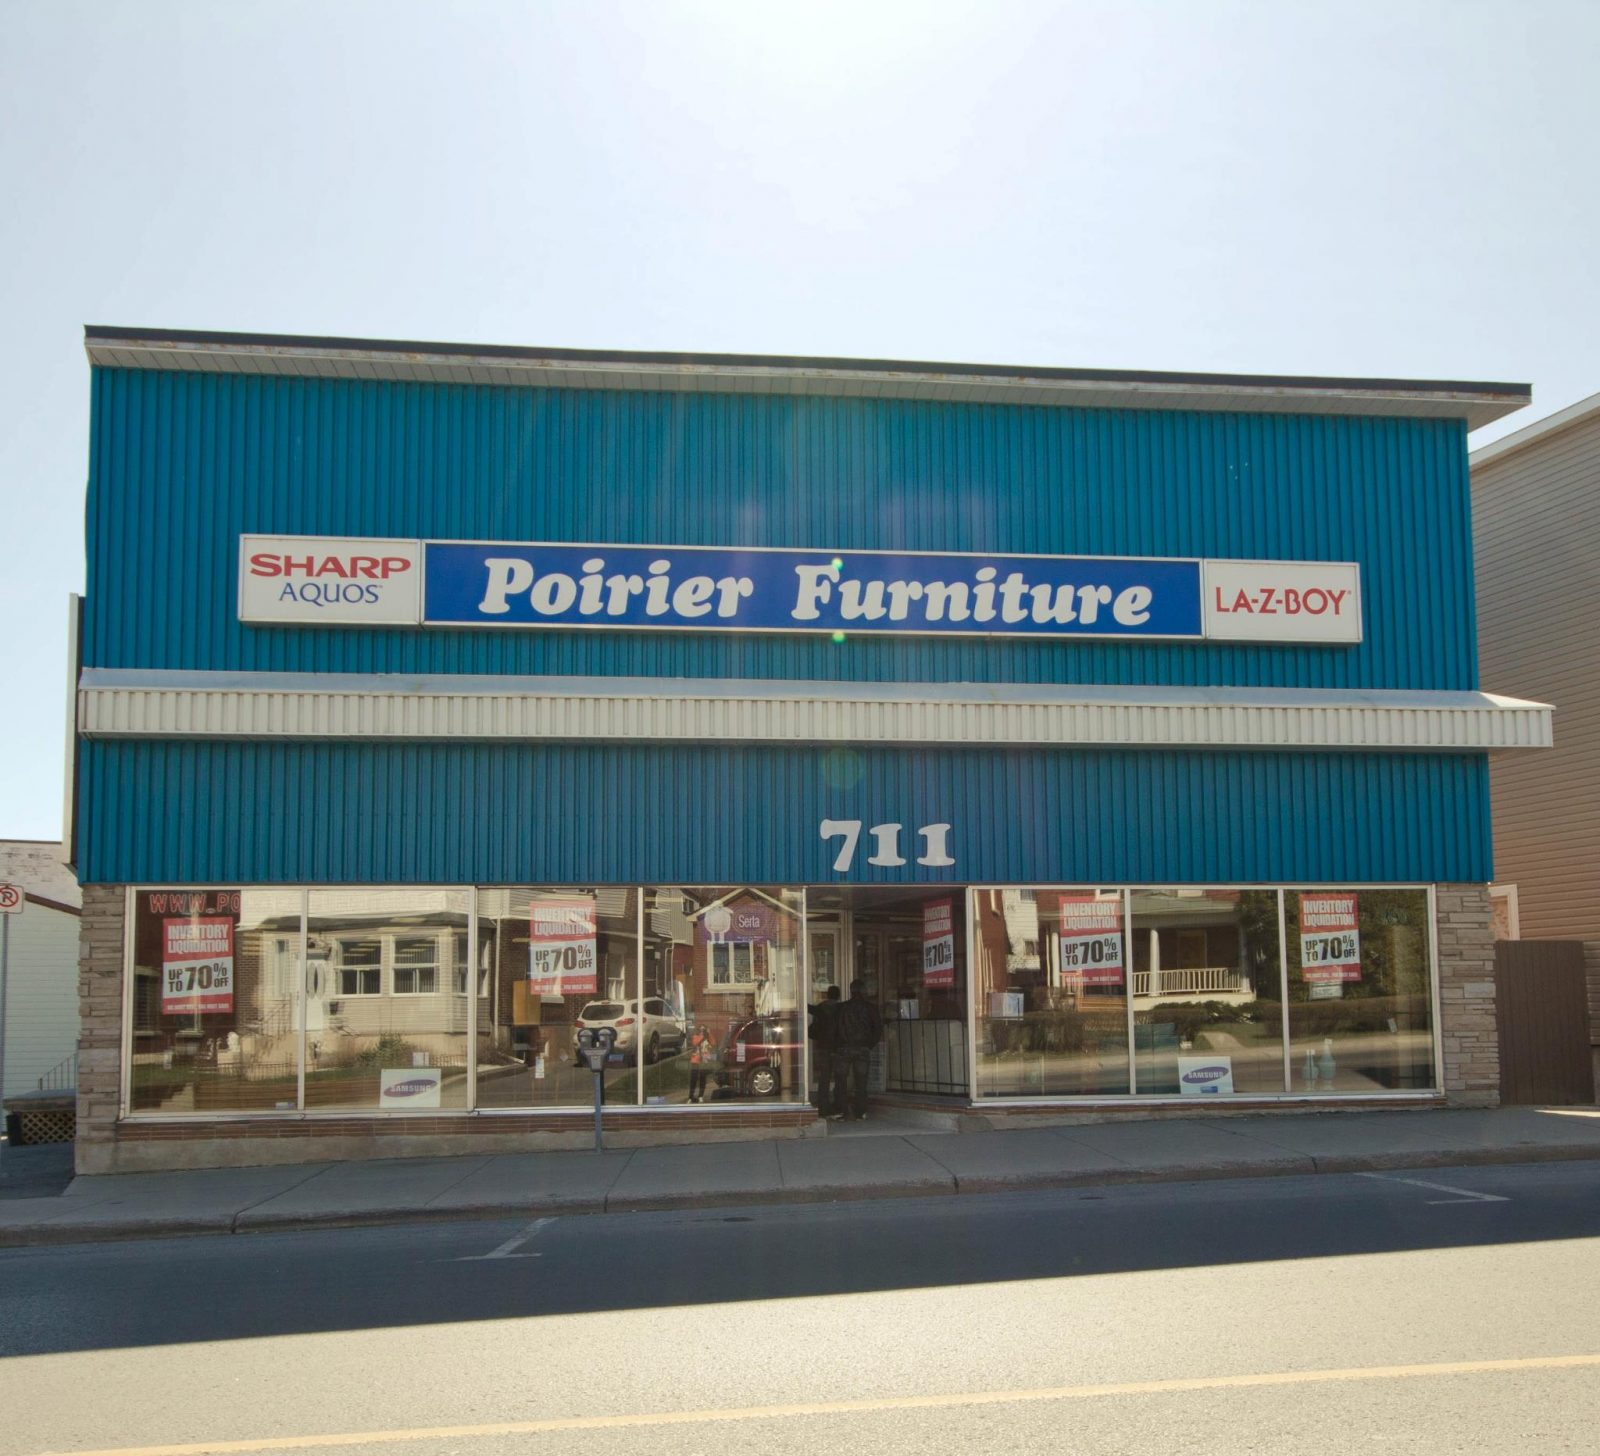 What’s next for Poirier Furniture